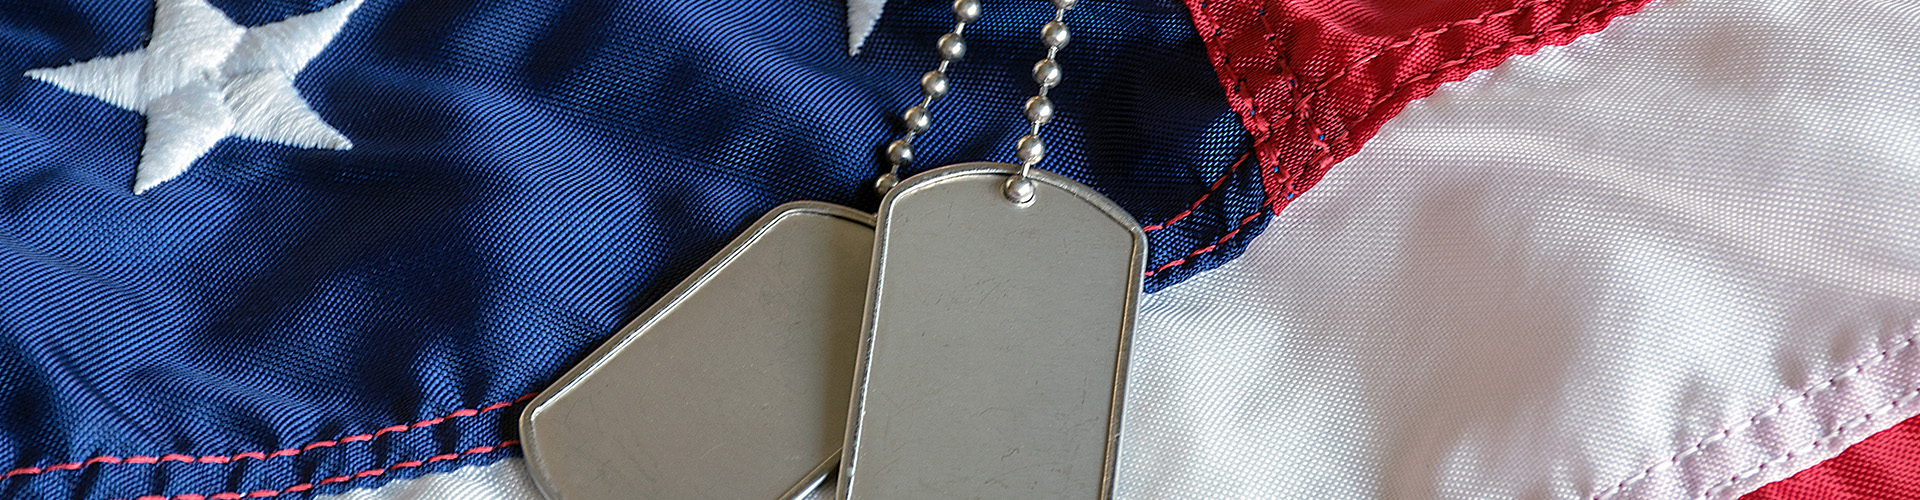 military dog tags on American flag with embroidered stars